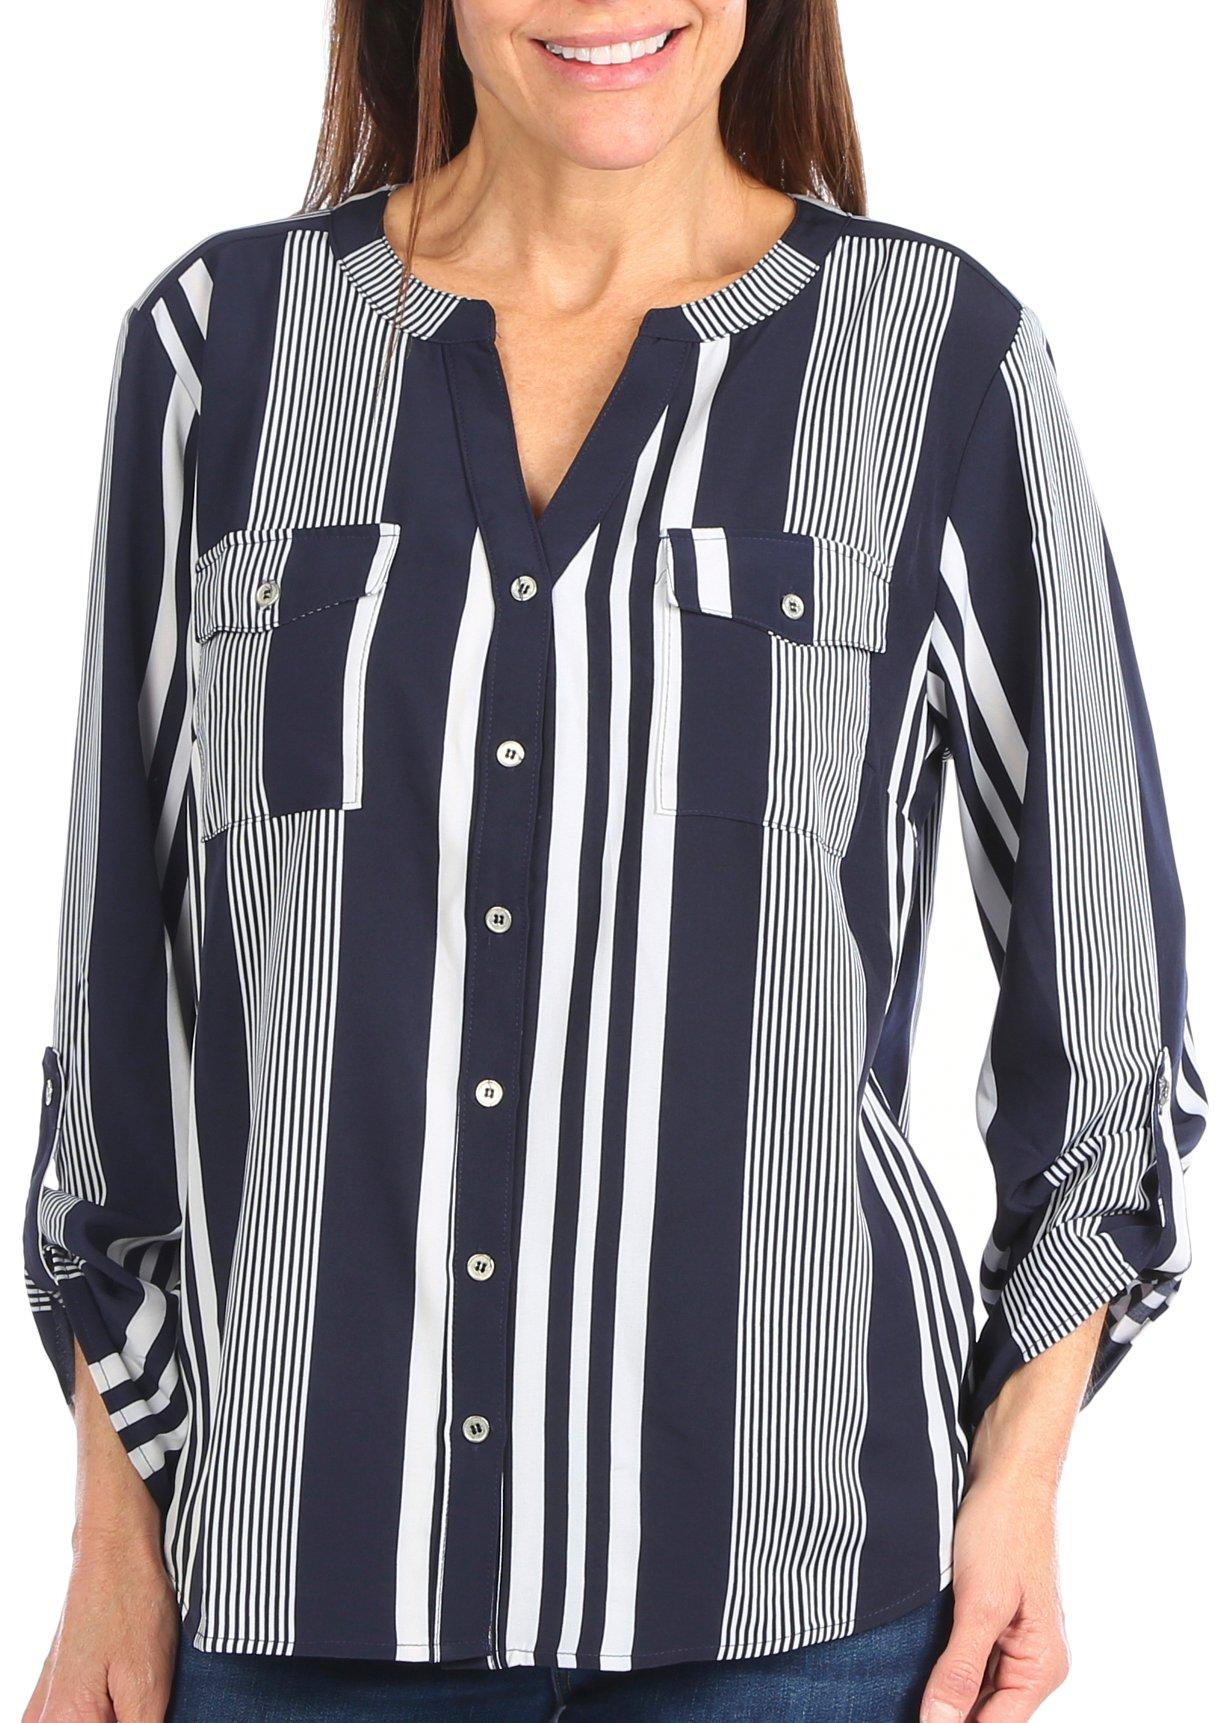 Juniper + Lime Womens Stripes 3/4 Sleeve Silky Stretch Top